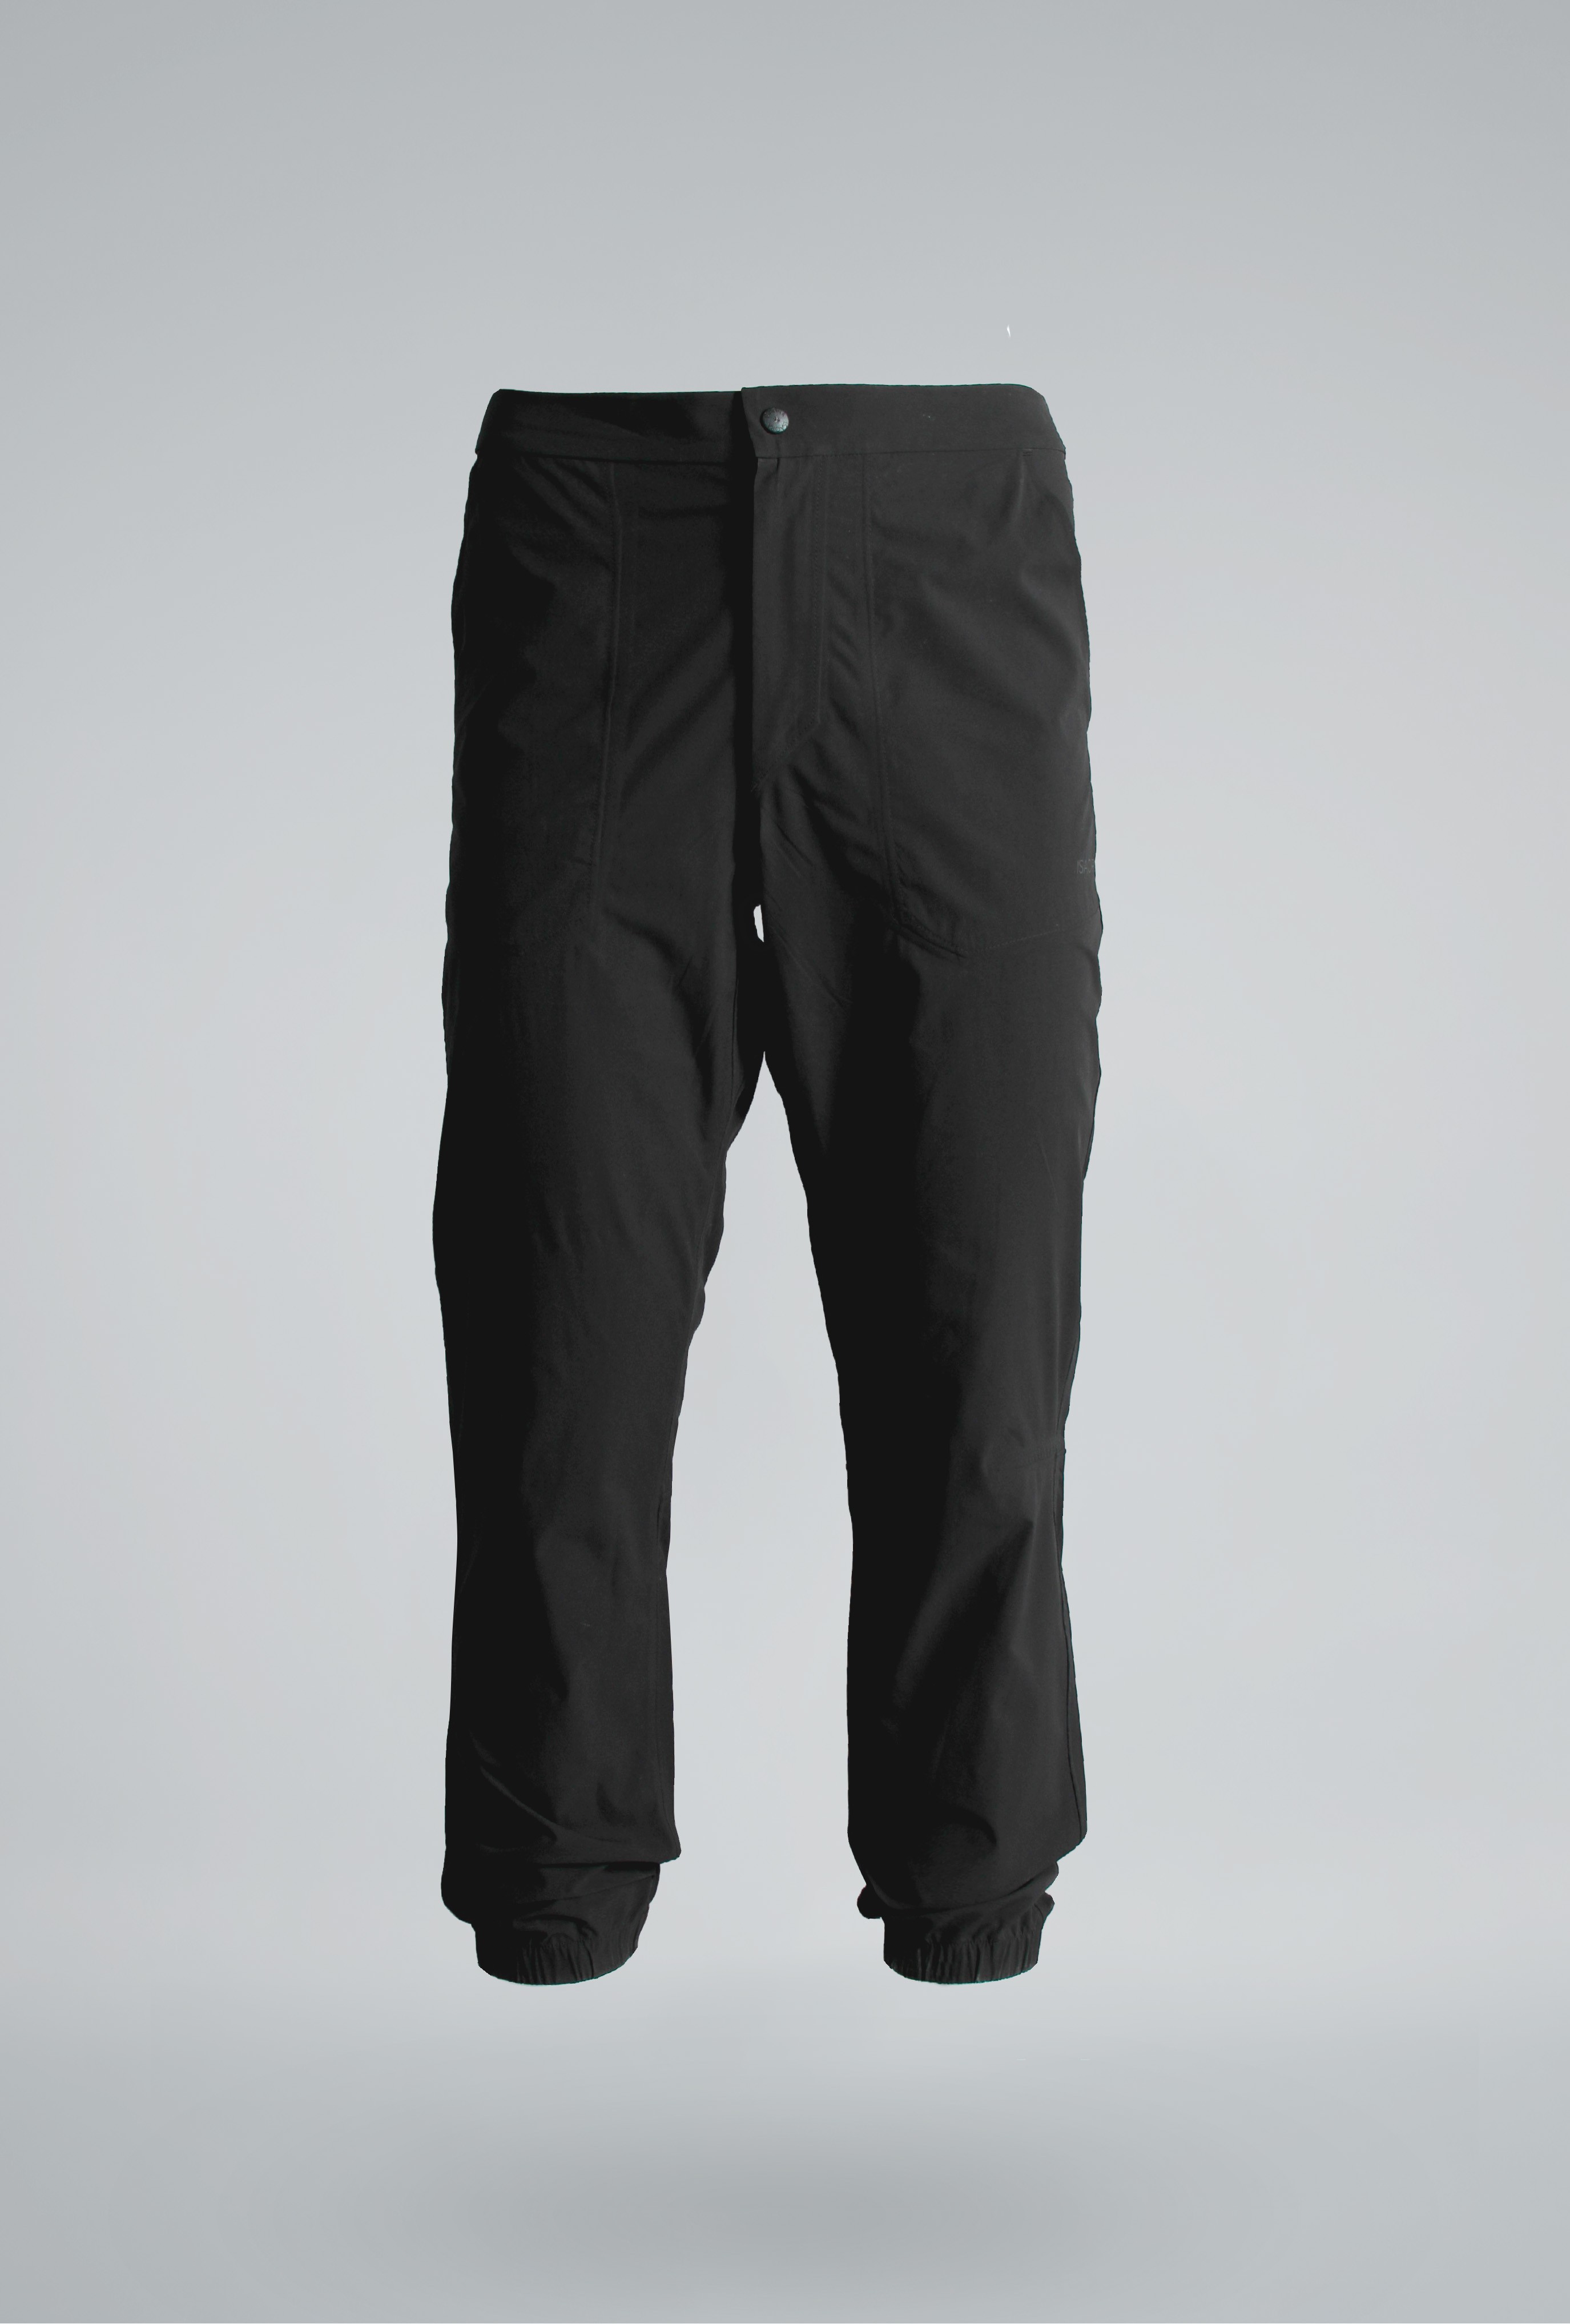 FLY PANT CARGO